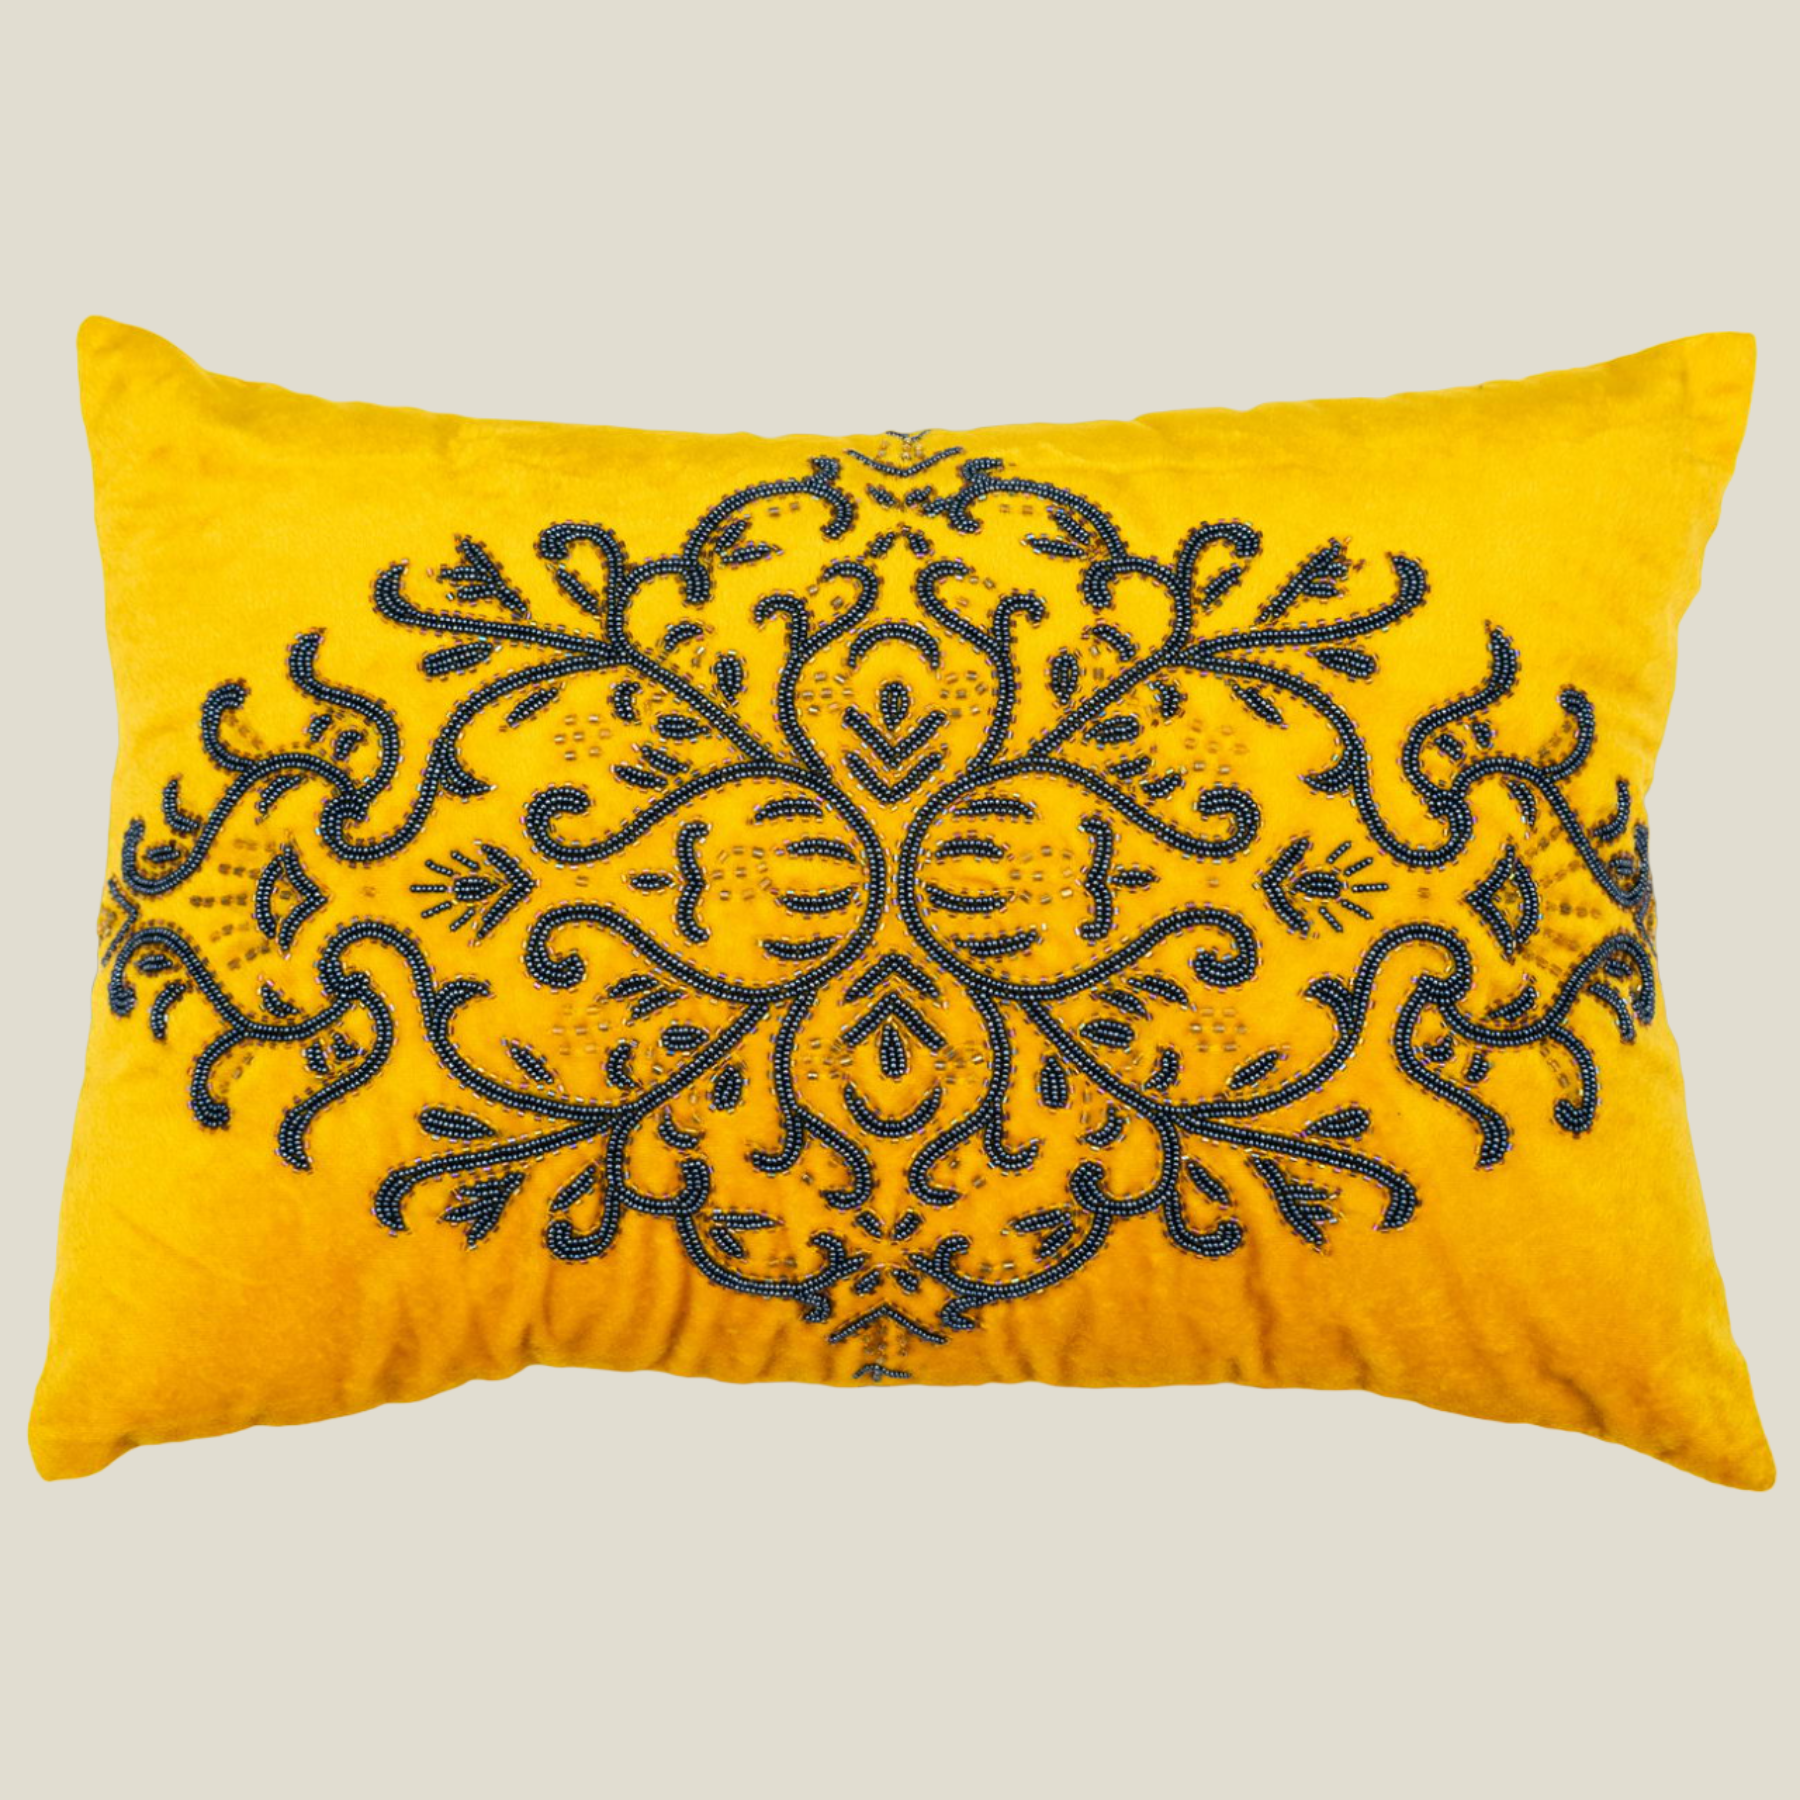 The Luxelife Handcrafted Yellow Velvet Cushion Cover (Floral Embroidery)